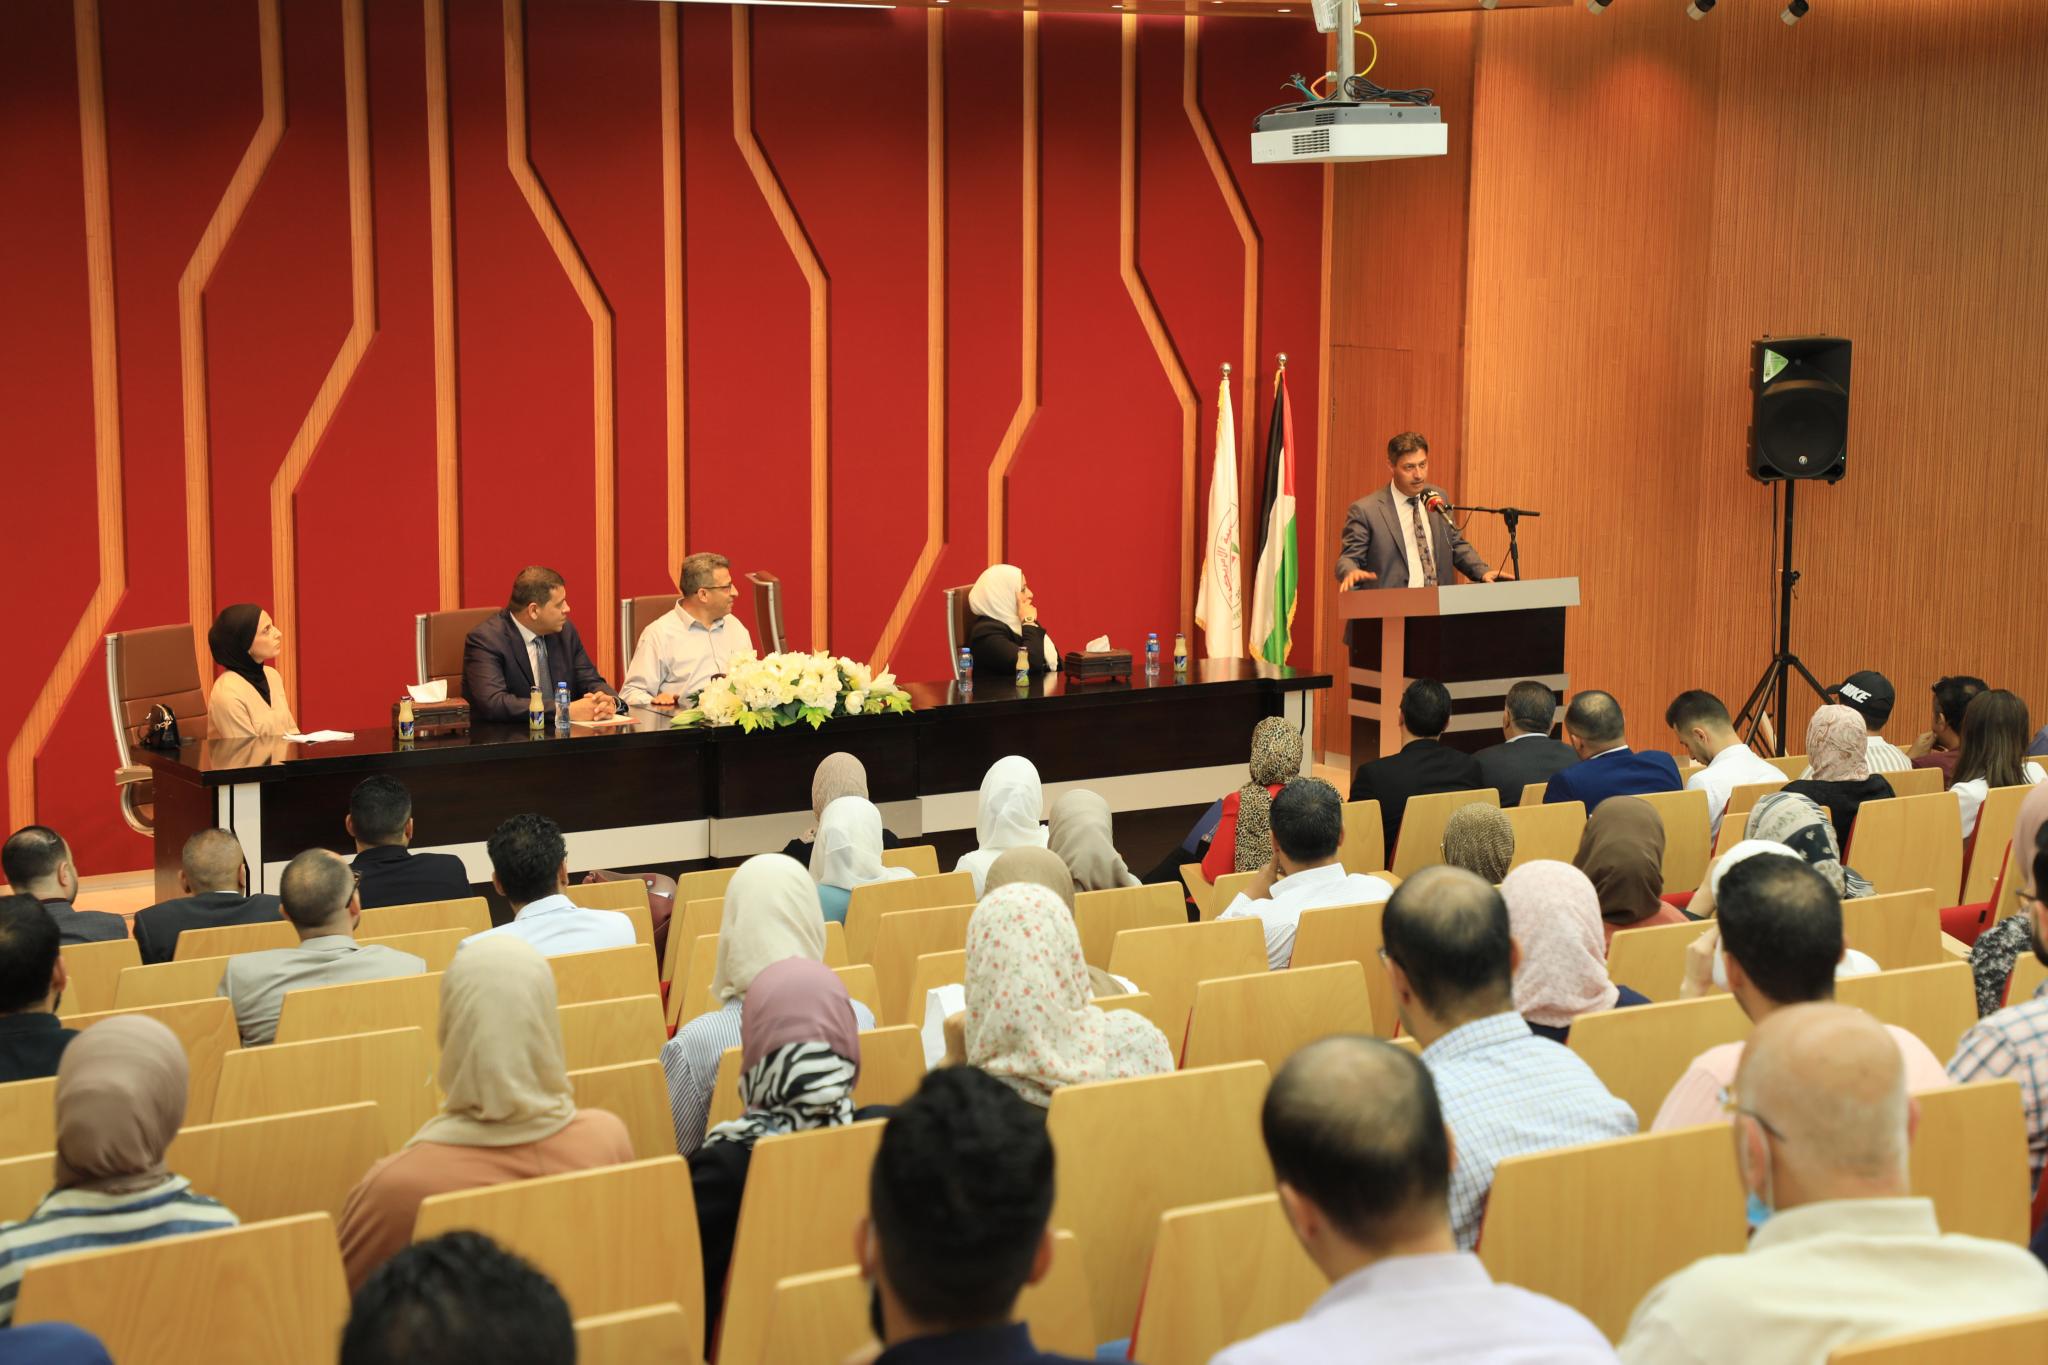 AAUP Announces the Beginning of the Procedures to Get the ADEE Leader for the Faculty of Dentistry